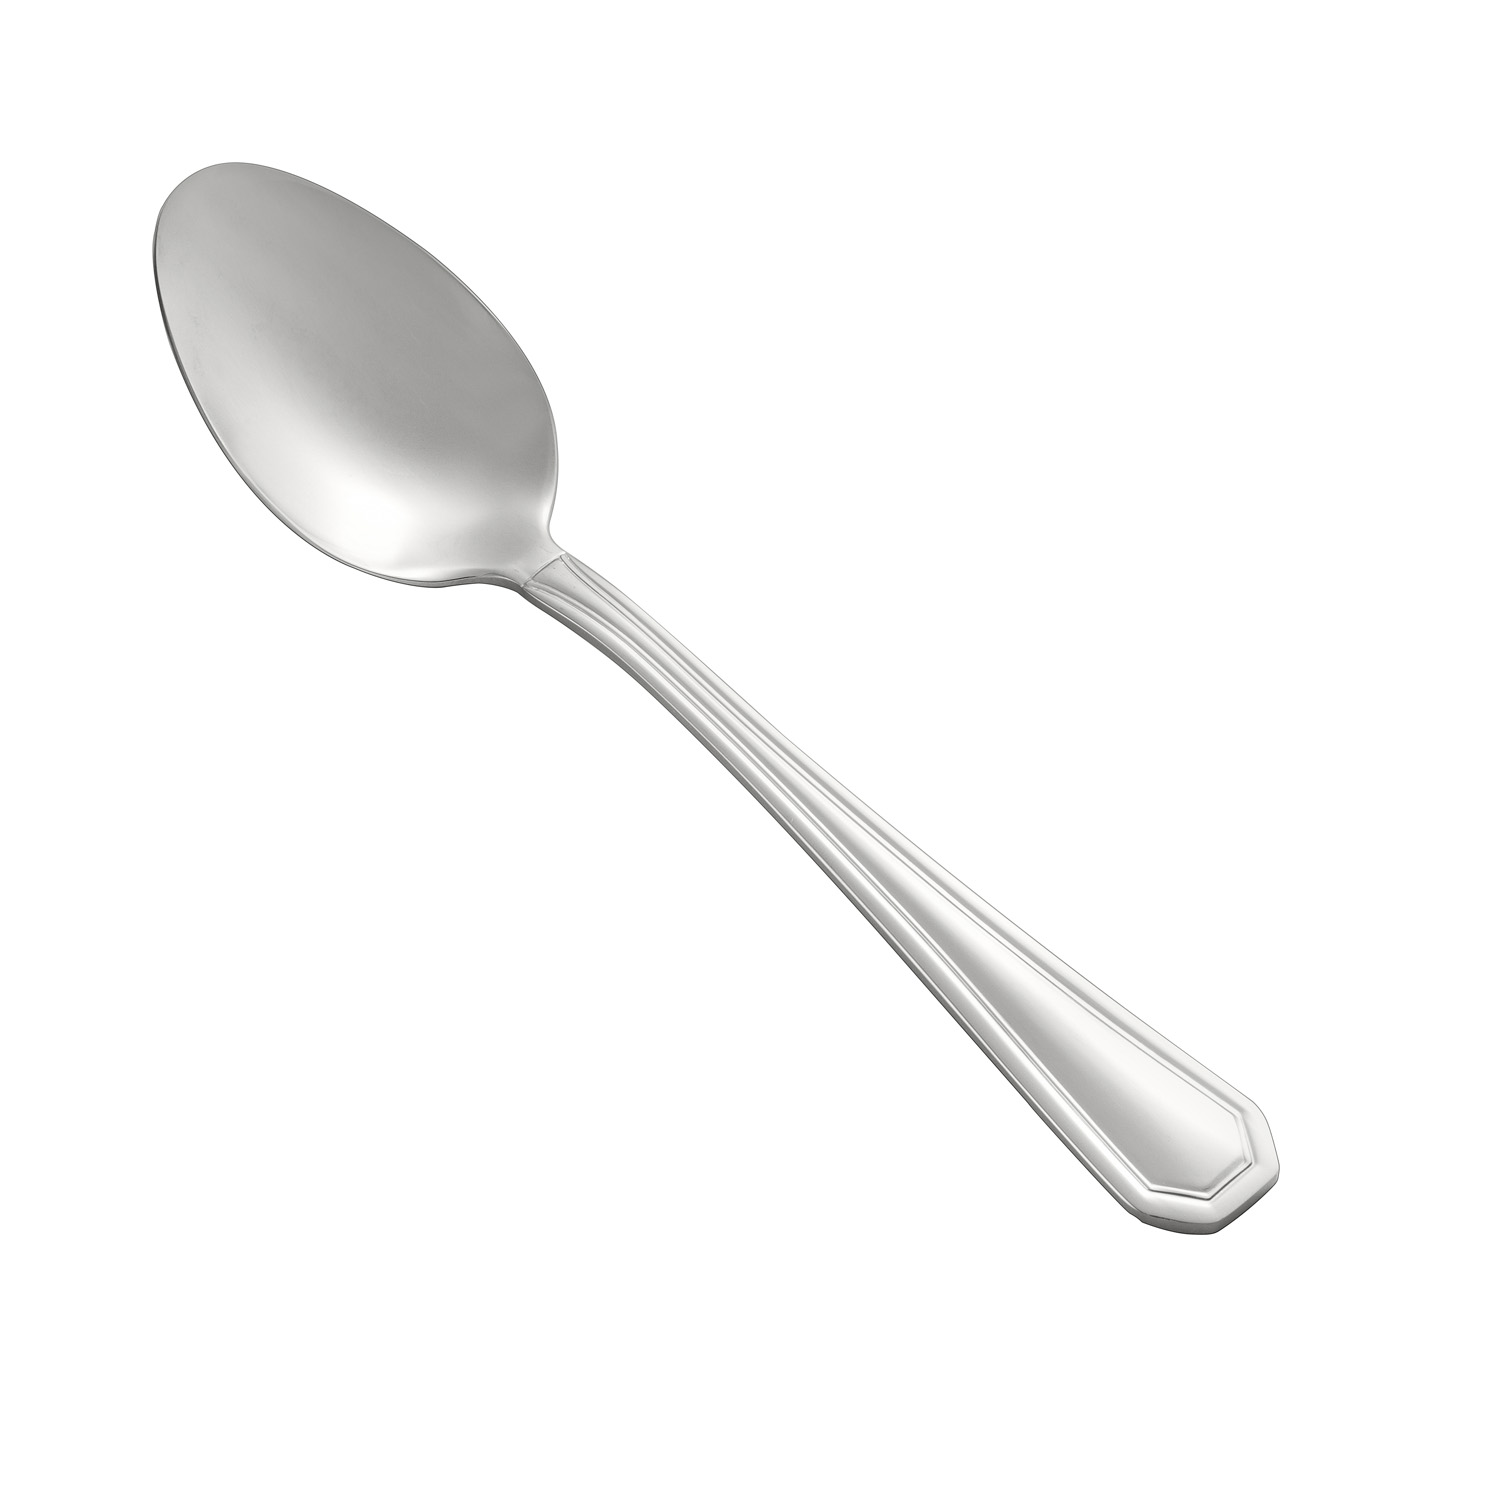 CAC China 8006-03 Lux Dinner Spoon, Extra Heavyweight 18/8, 7 3/8"